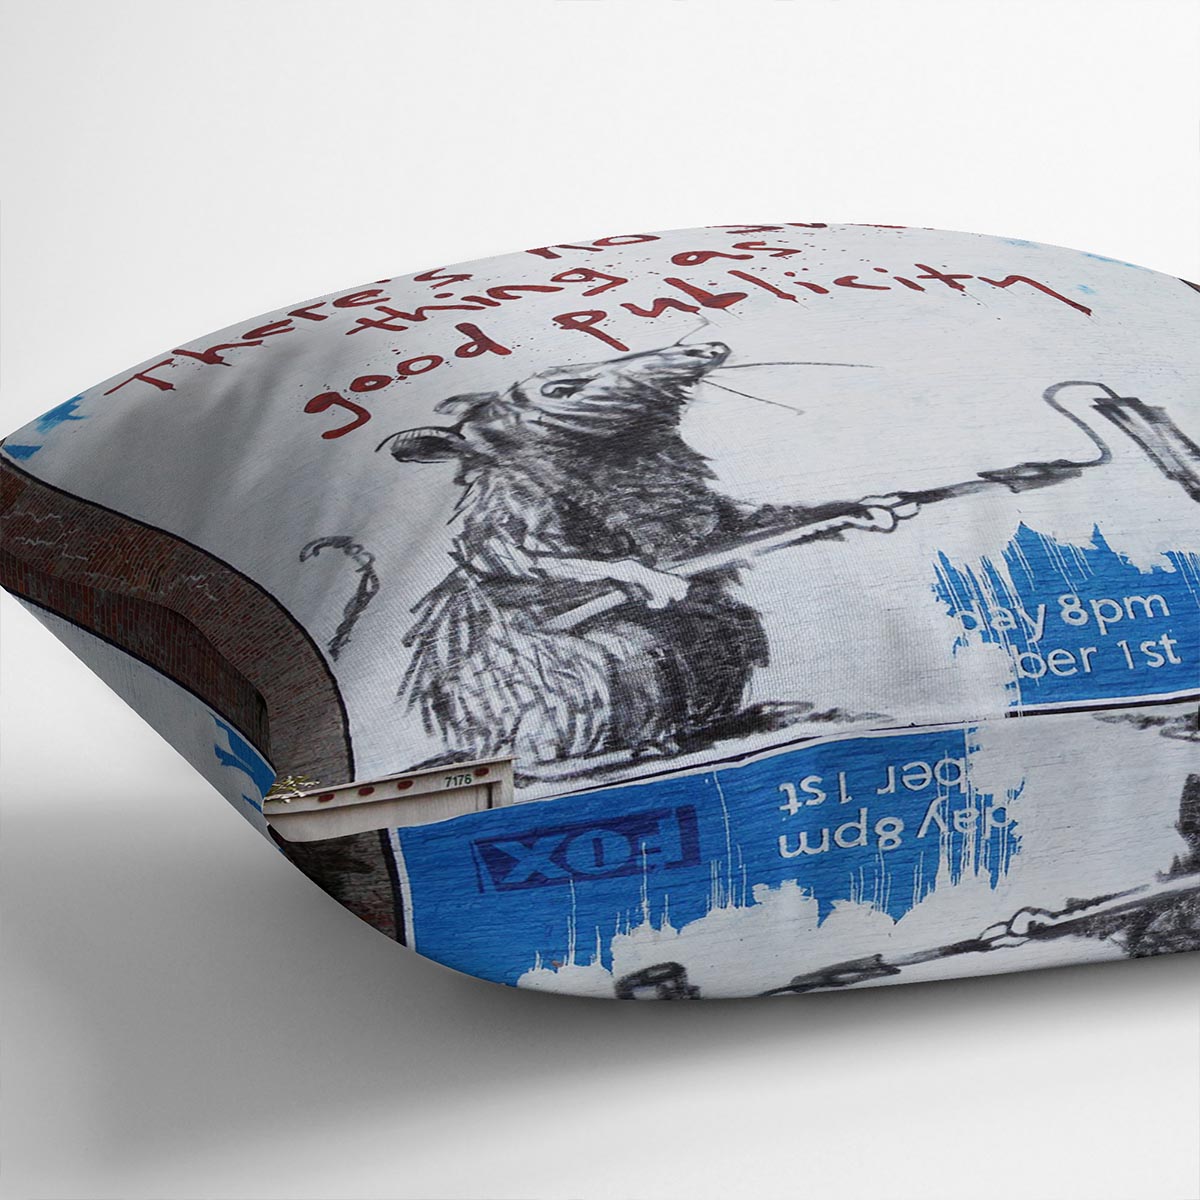 Banksy No Such Thing As Good Publicity Cushion